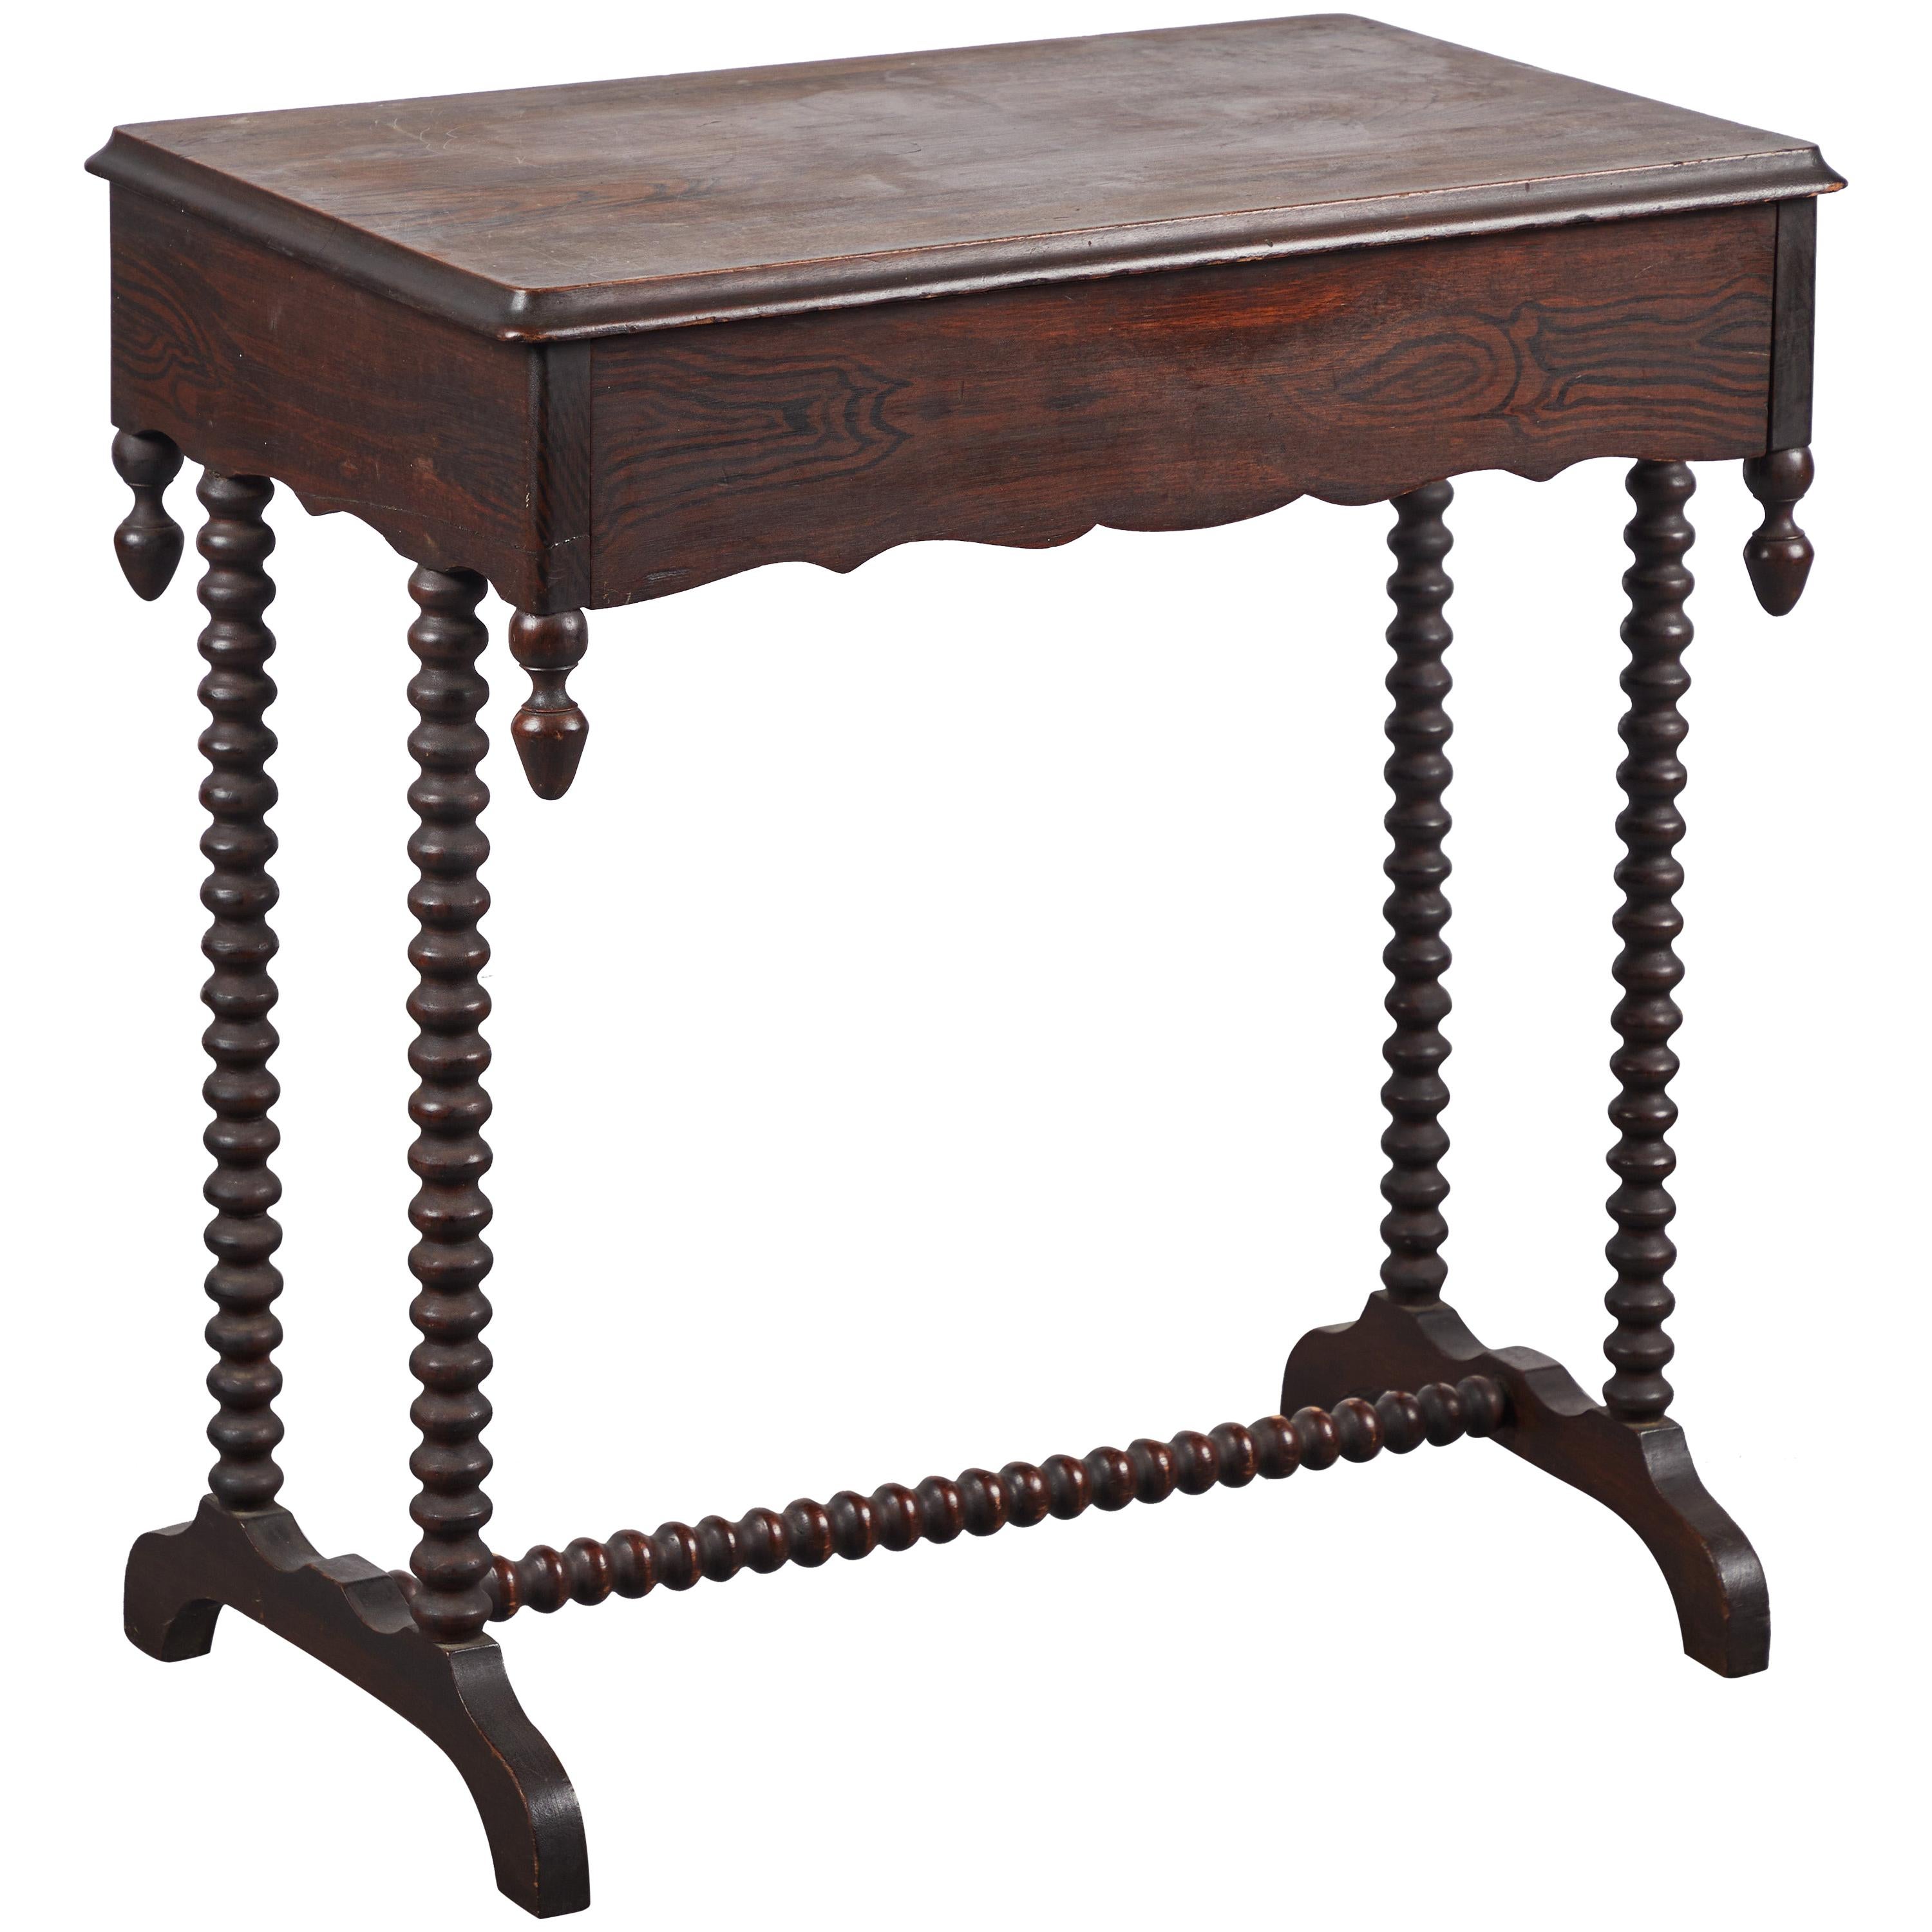 Early American Spindle Side Table